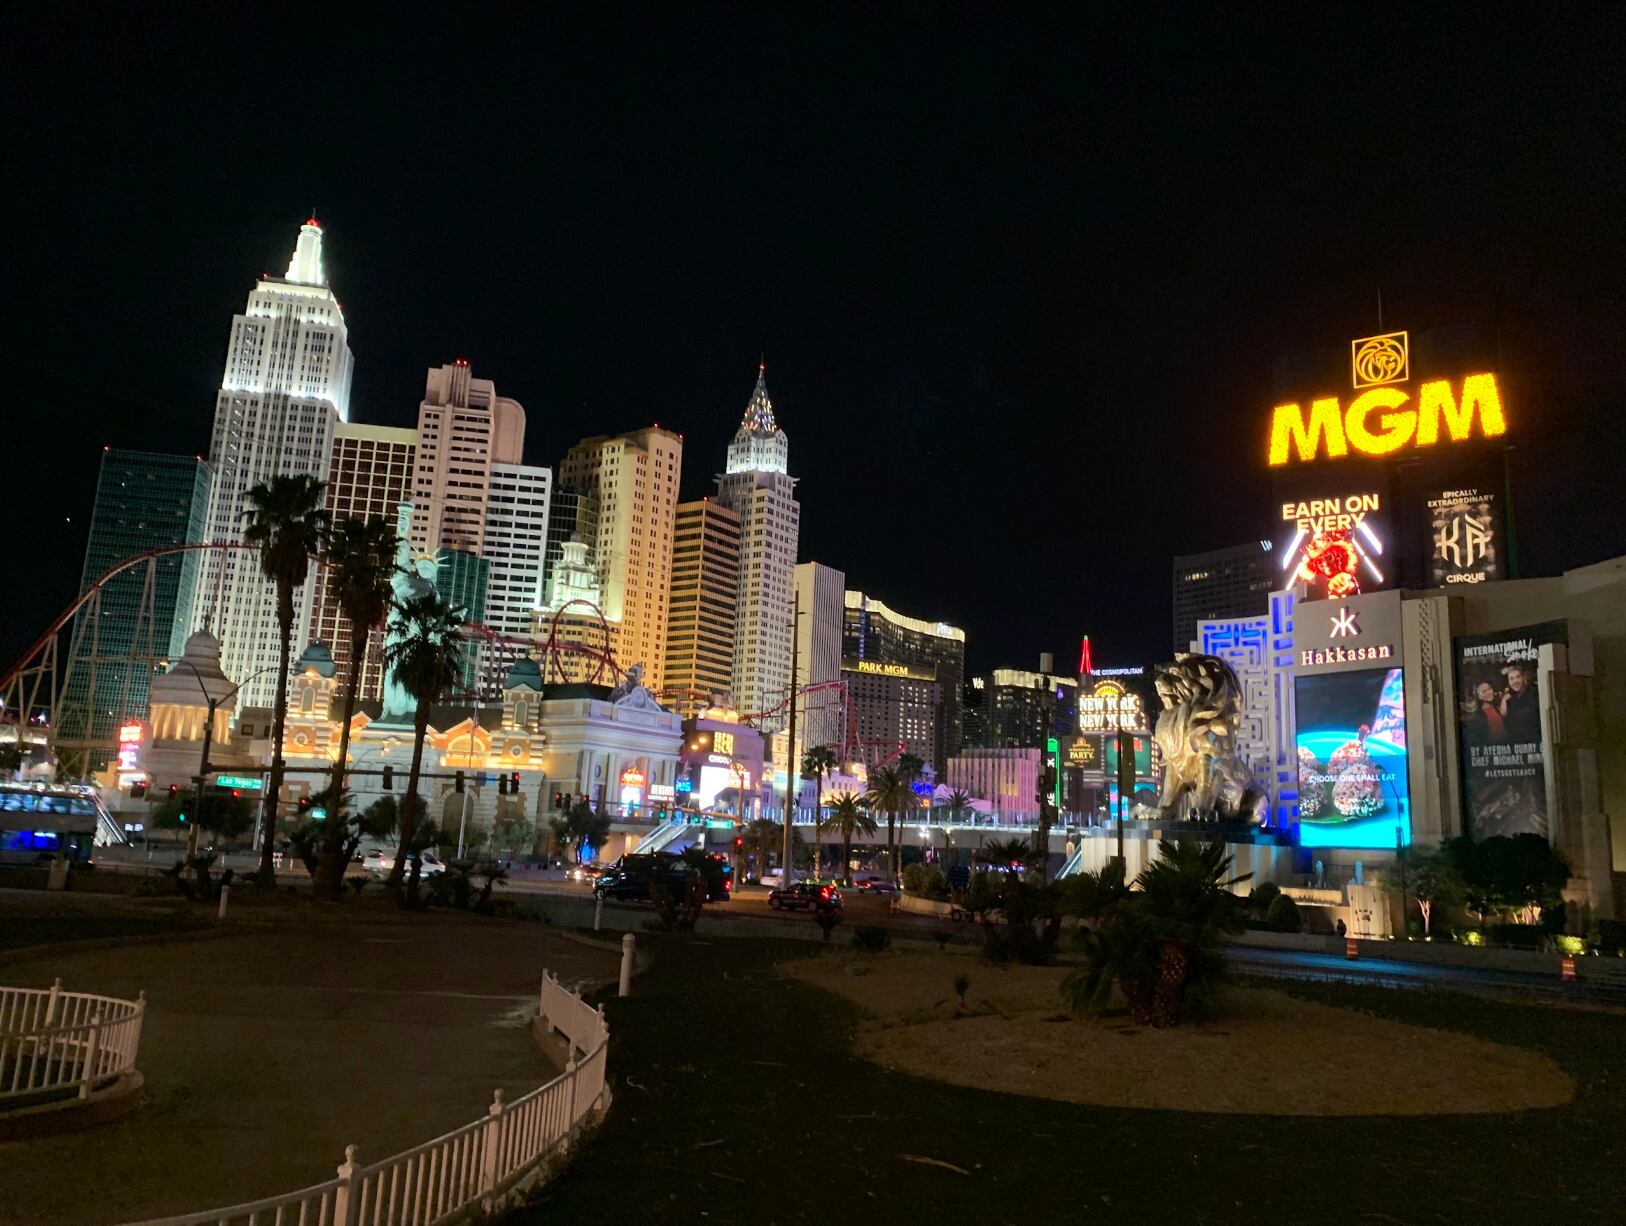 The Las Vegas skyline welcomes travelers on Route 66 - this view includes the famed New York, New York Hotel and Casino and MGM Grand.